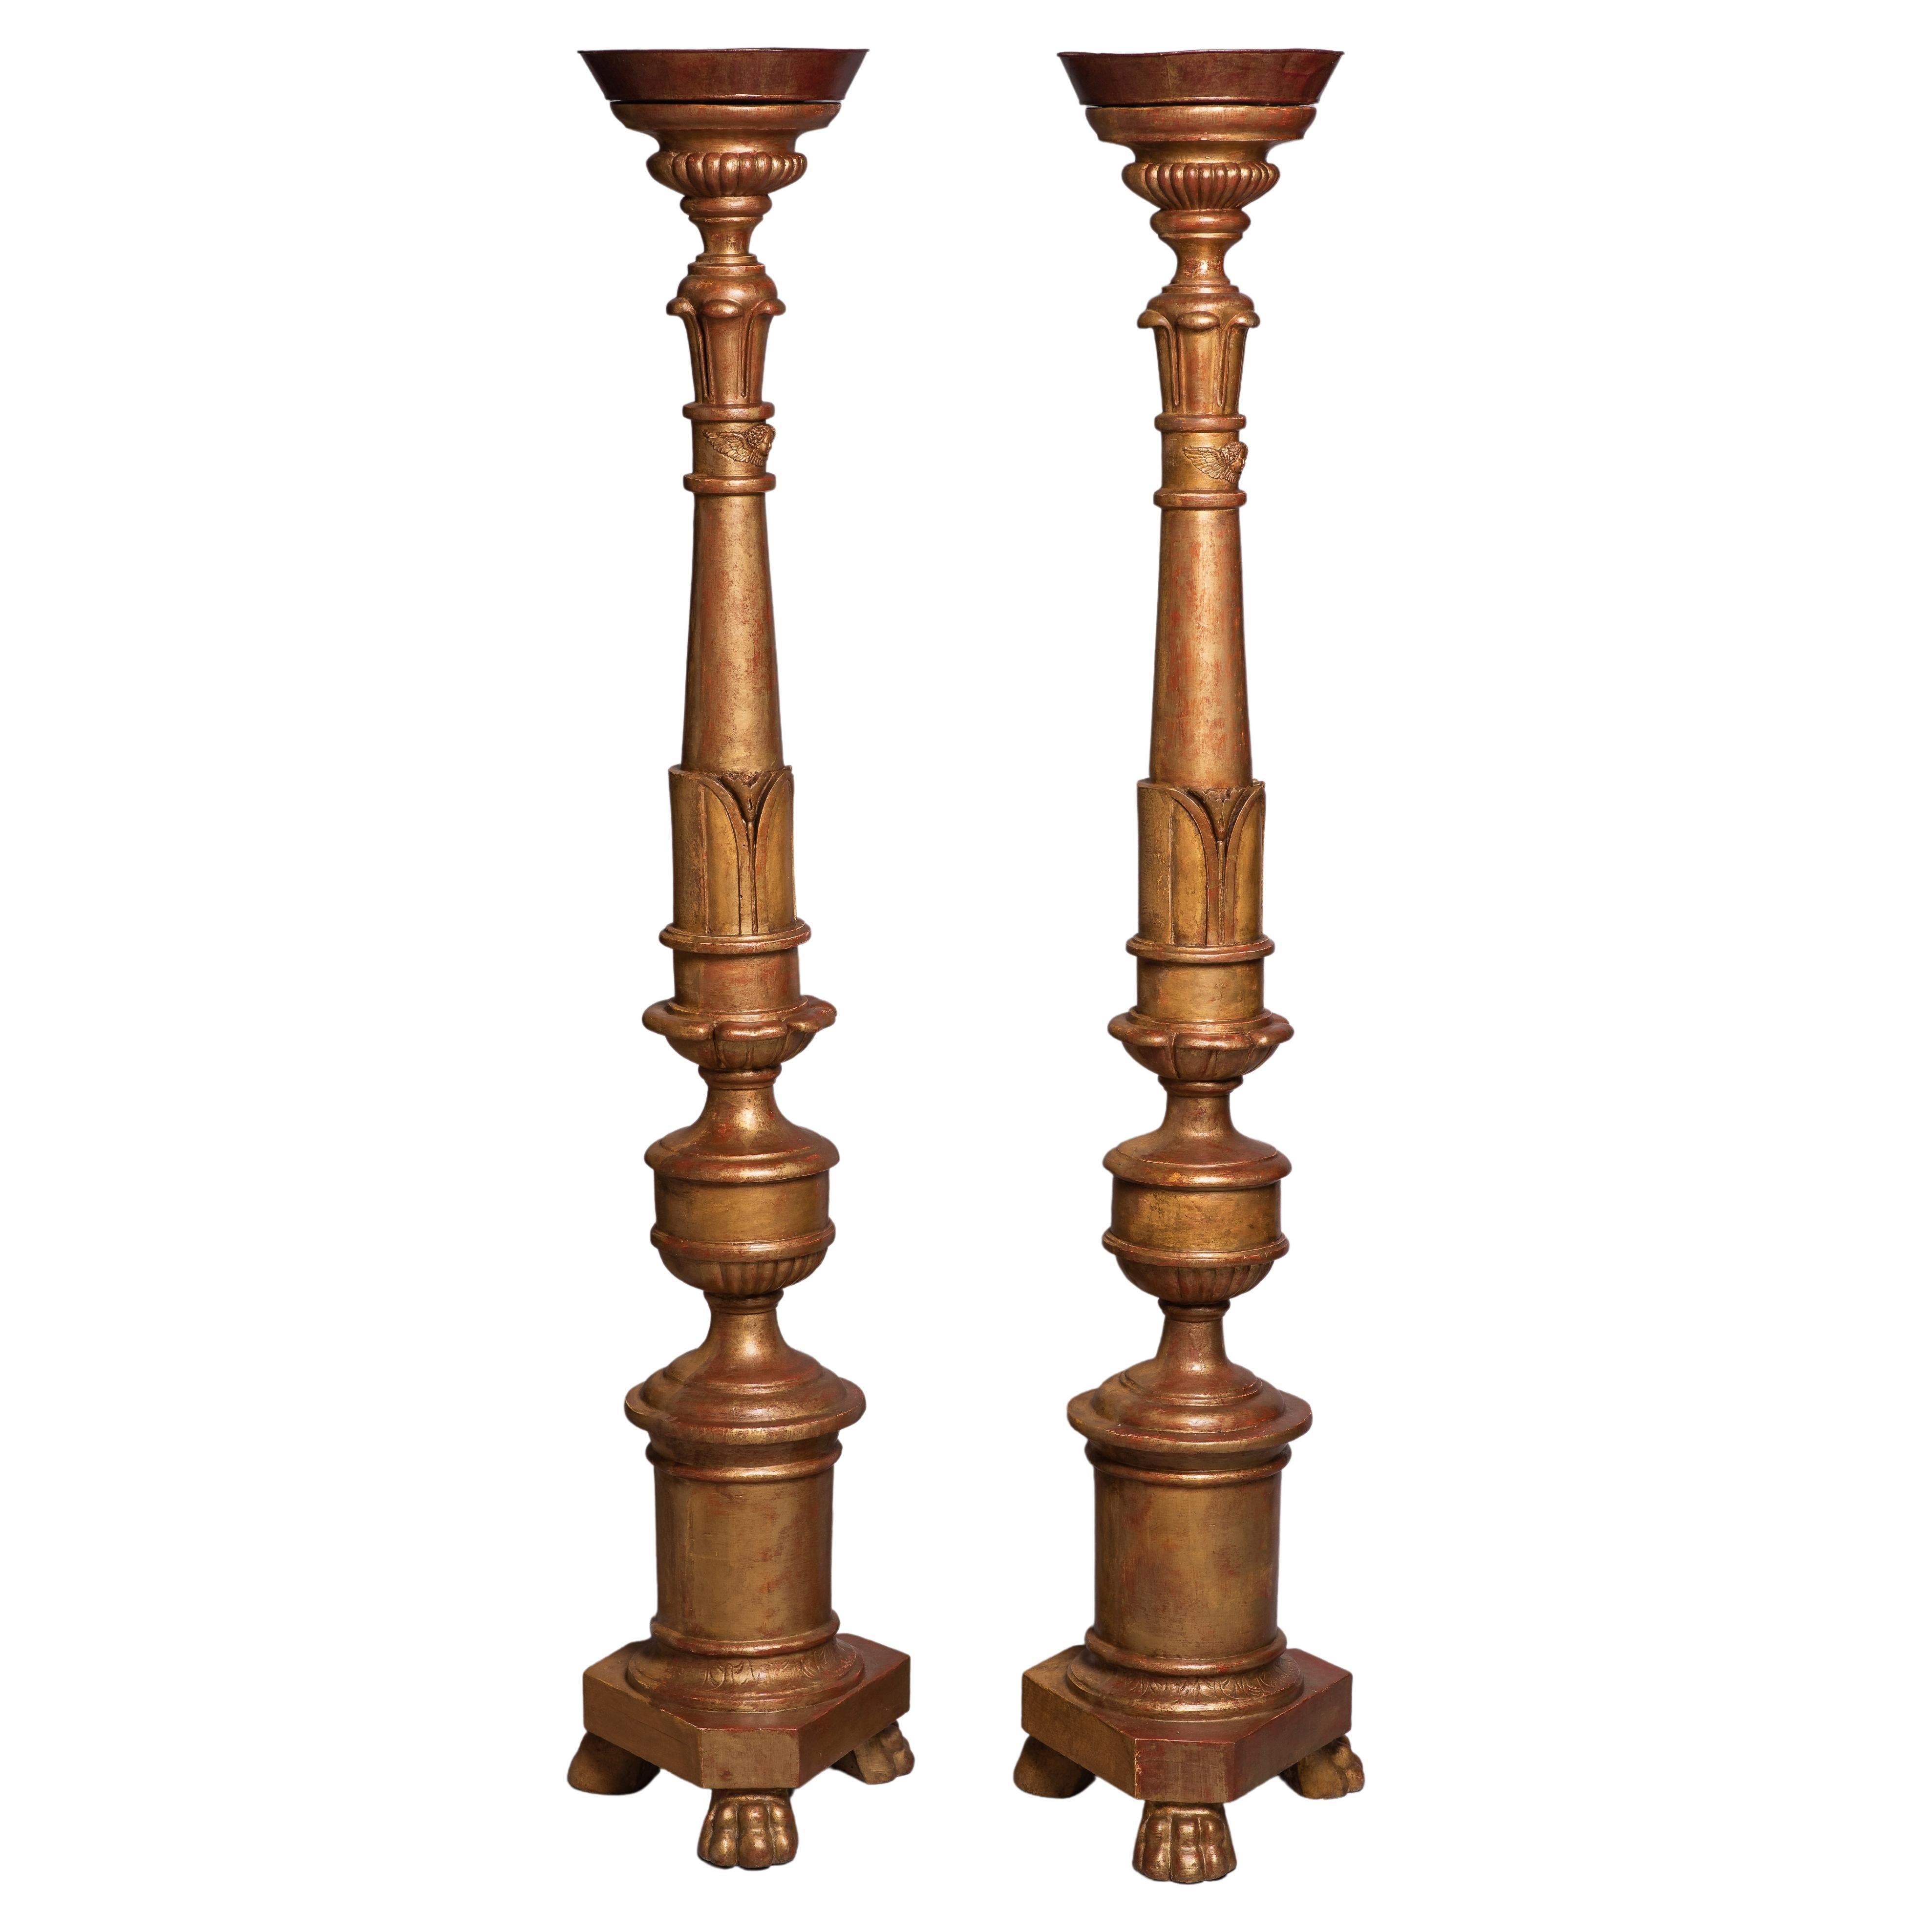 Pair of Large Candelabra-Candlesticks in Gilded Wood, France Directoire Period